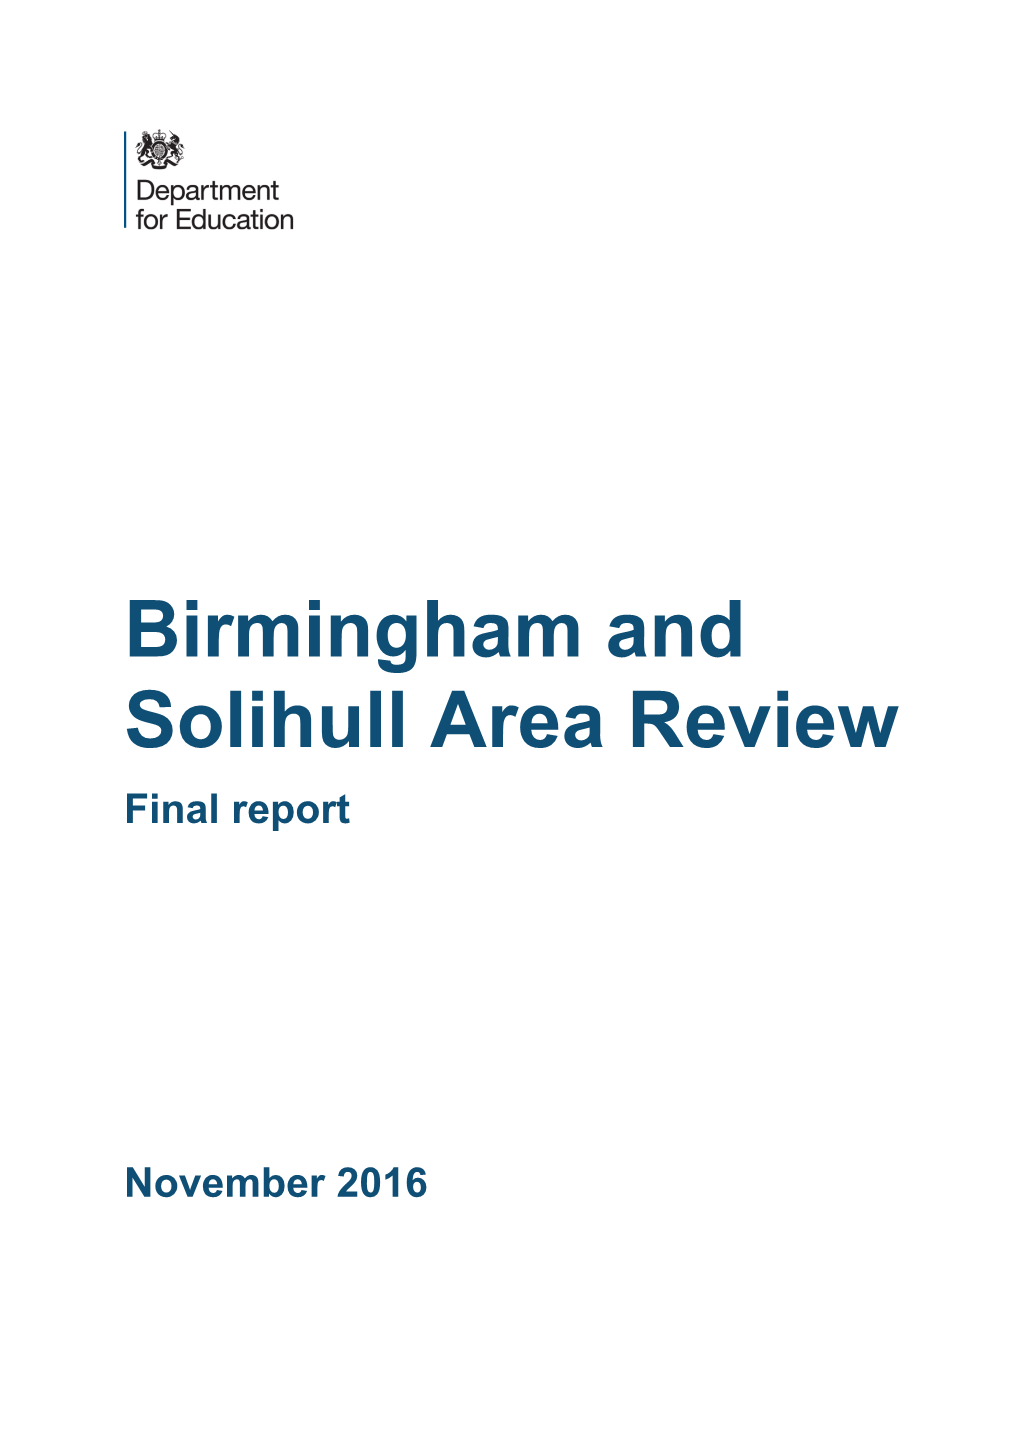 Birmingham and Solihull Area Review Final Report